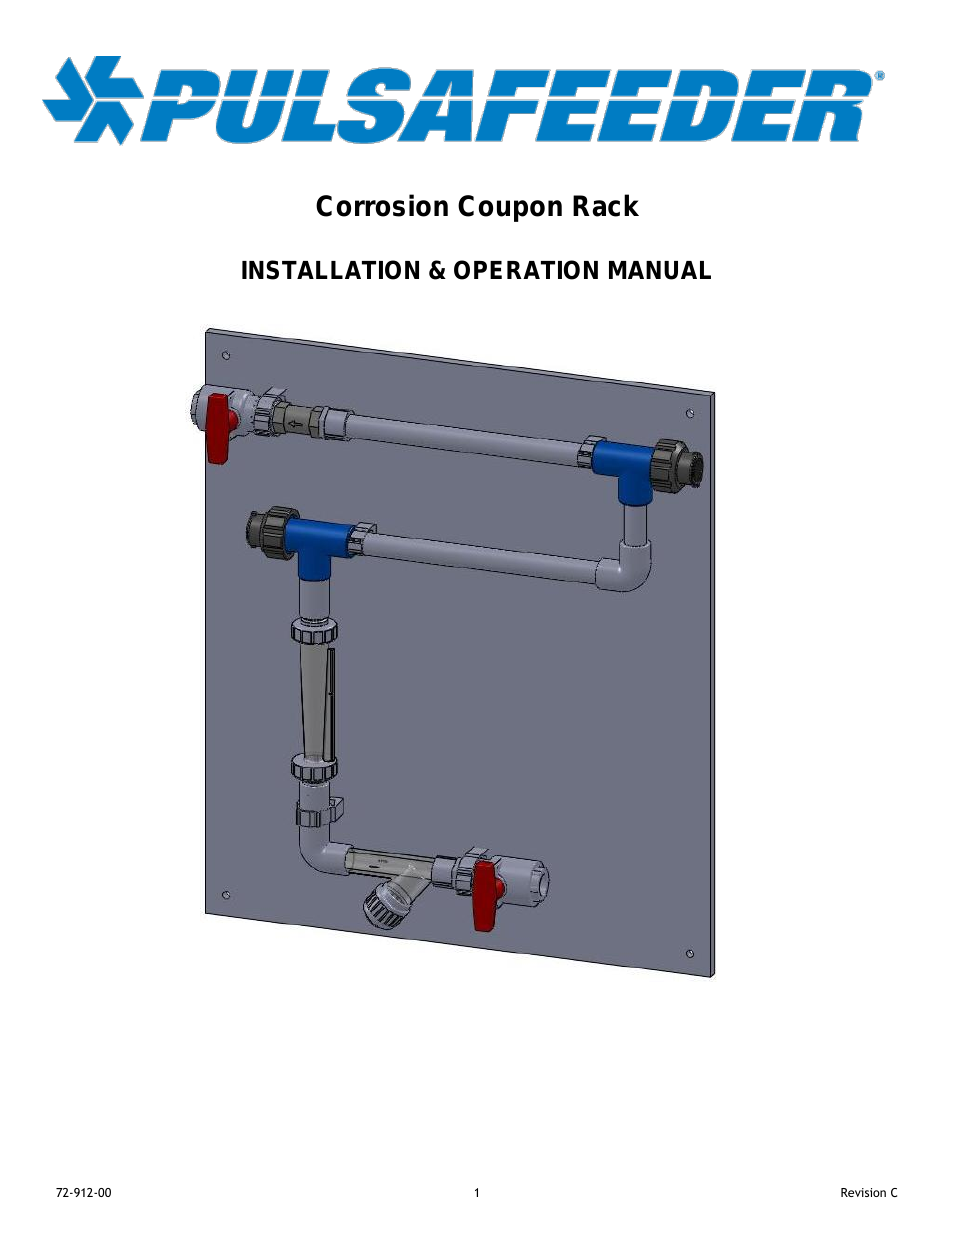 Corrosion Coupon Rack